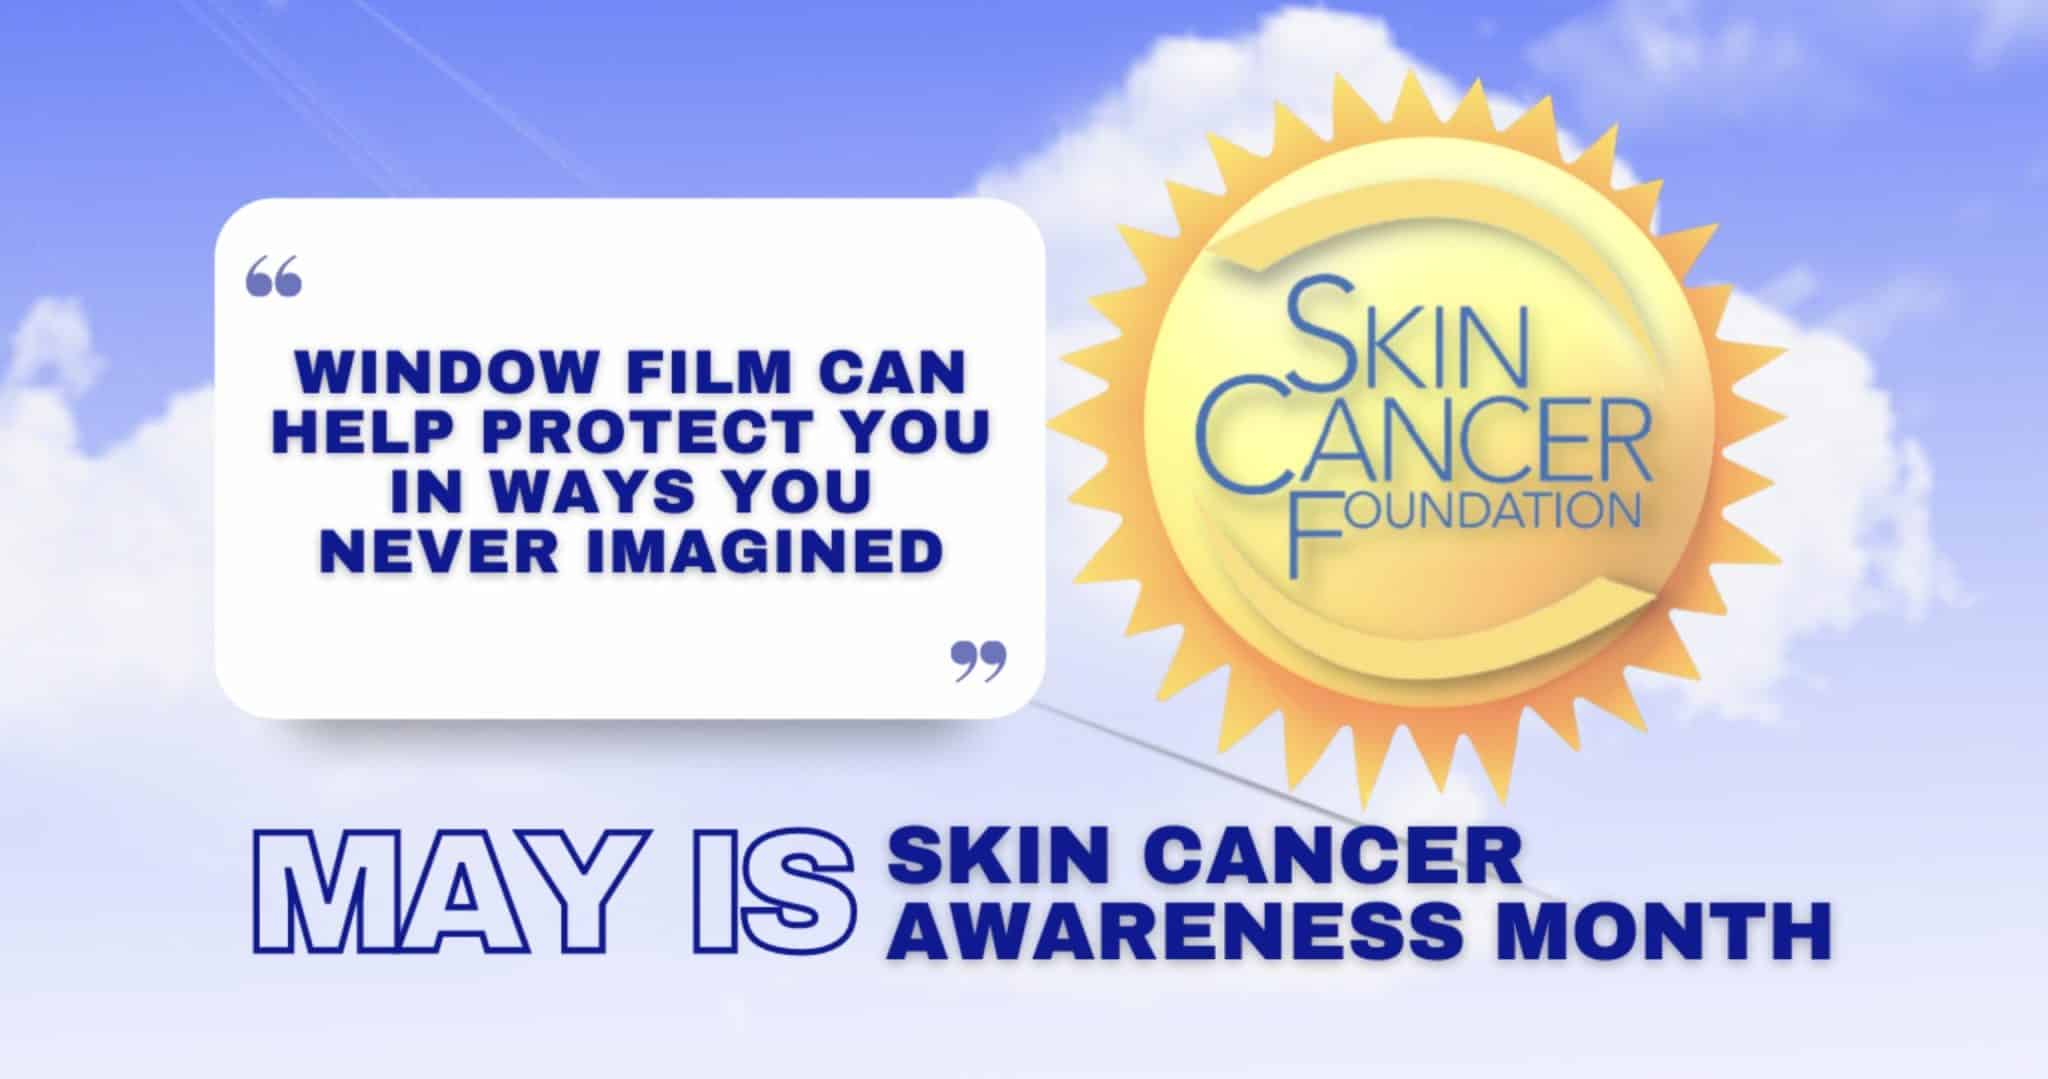 May Is Skin Cancer Awareness Month – How Can Window Film Help?